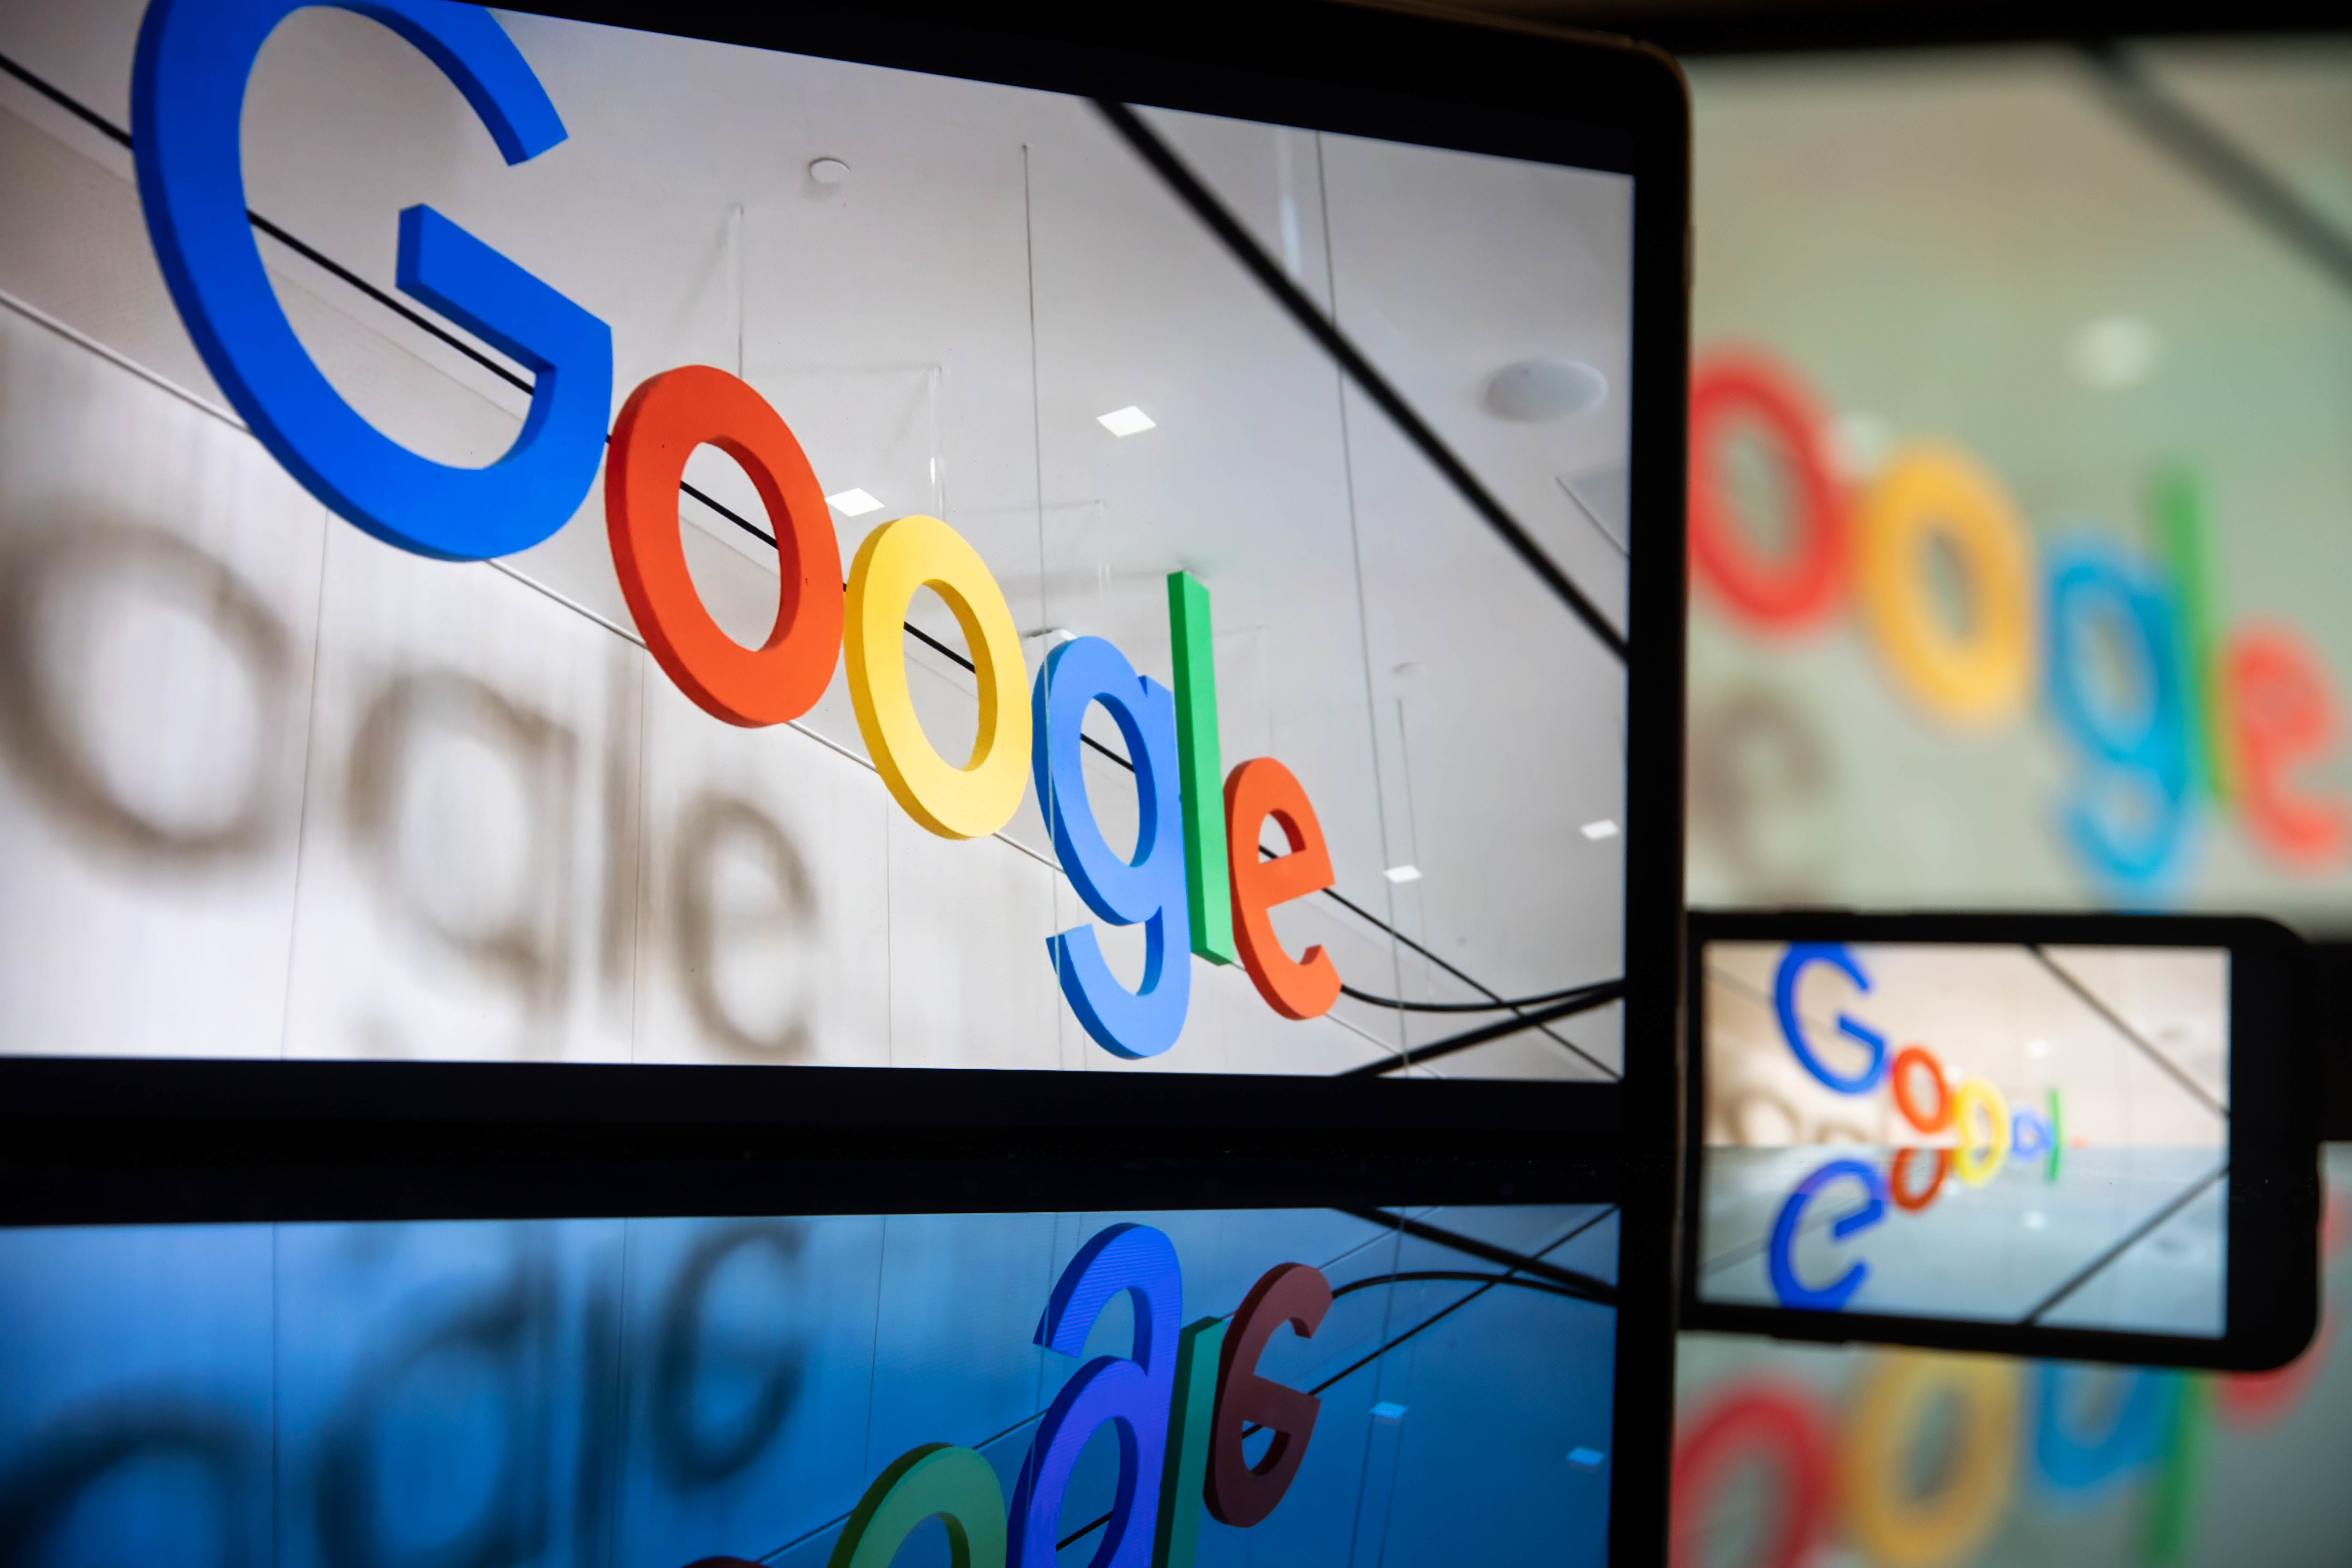 Short sellers’ damning reports may get harder to Google